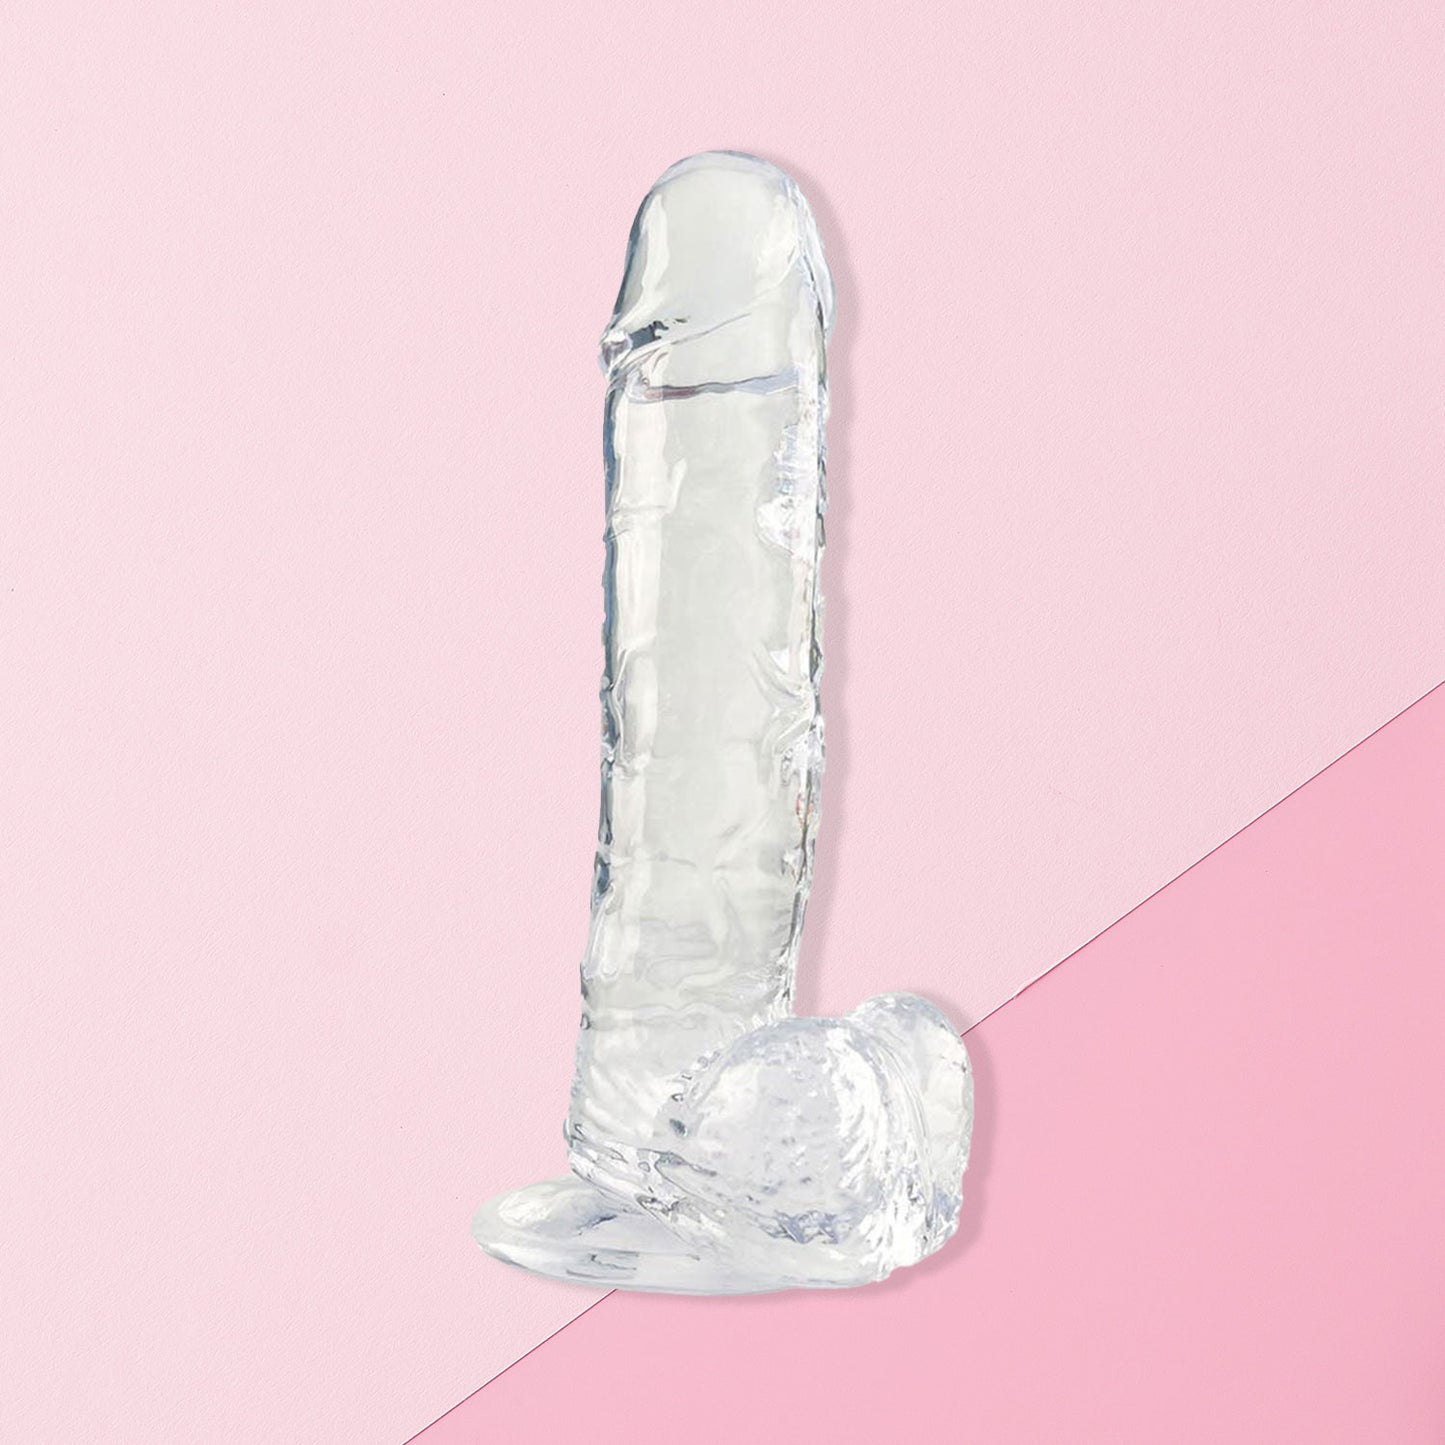 The Horny Company - No Frills Dildo 22cm x 4.5cm Suction Cup Dong with Balls Clear